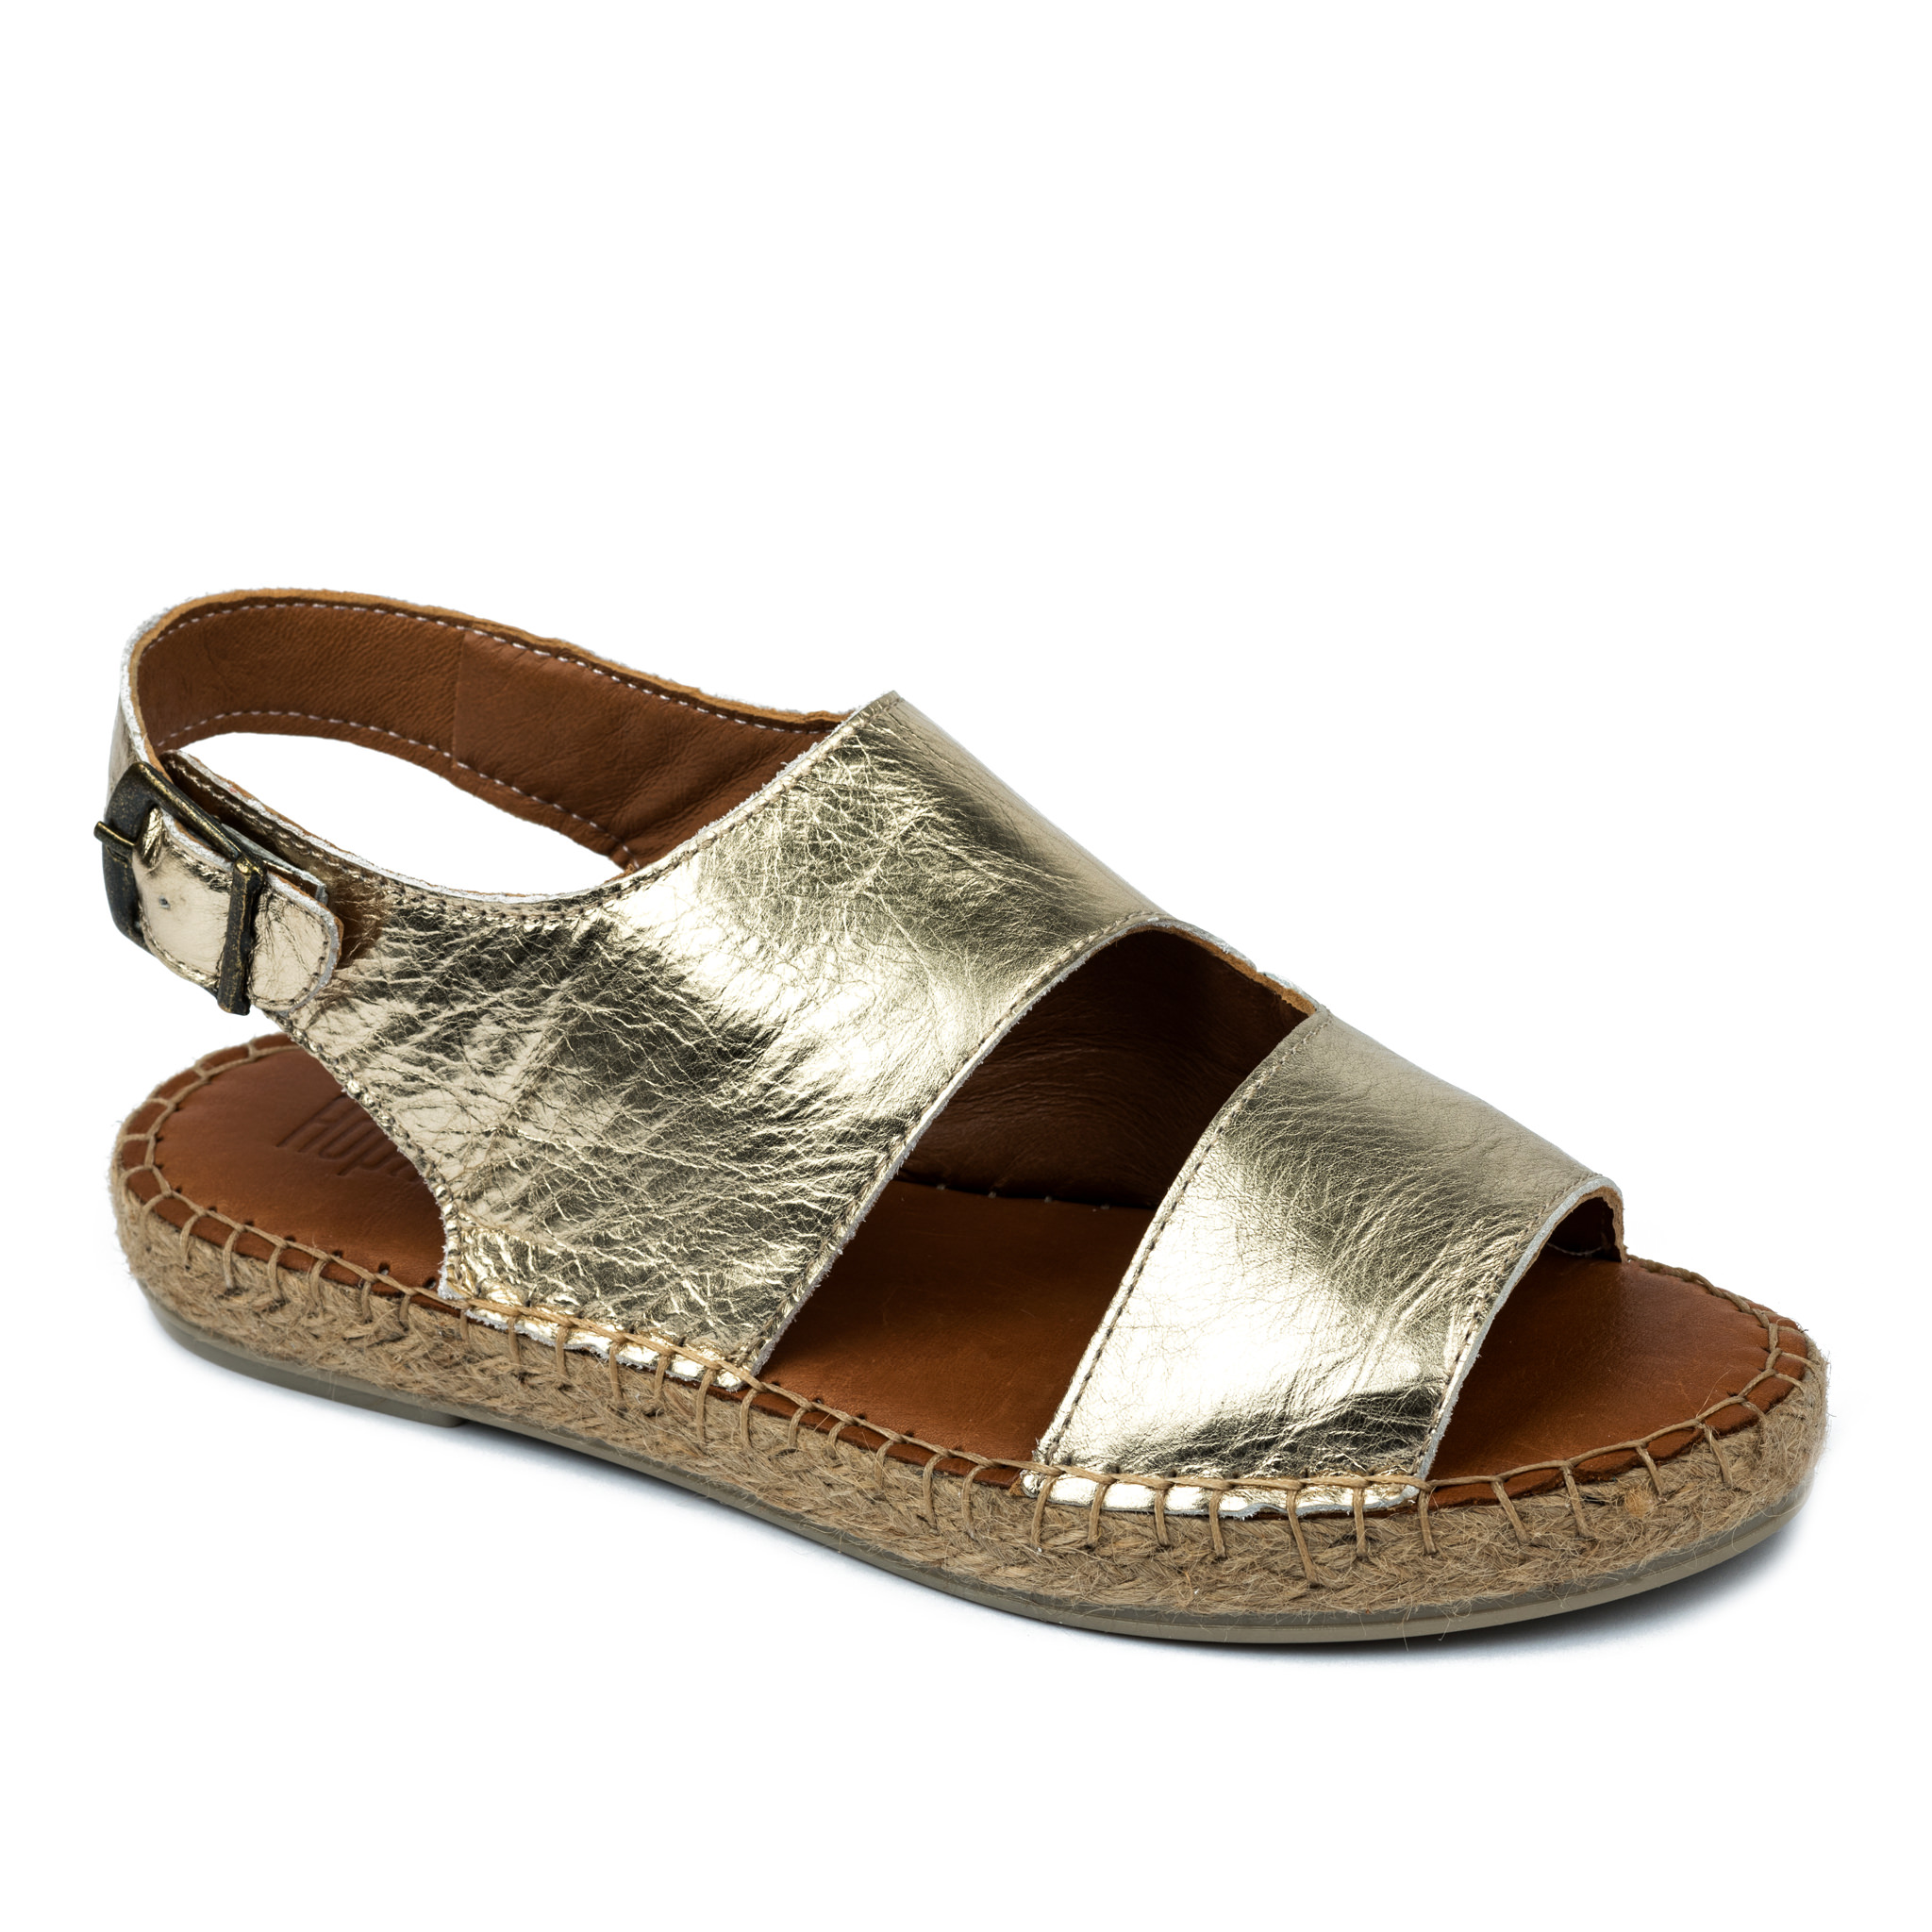 Leather espadrilles A588 - GOLD